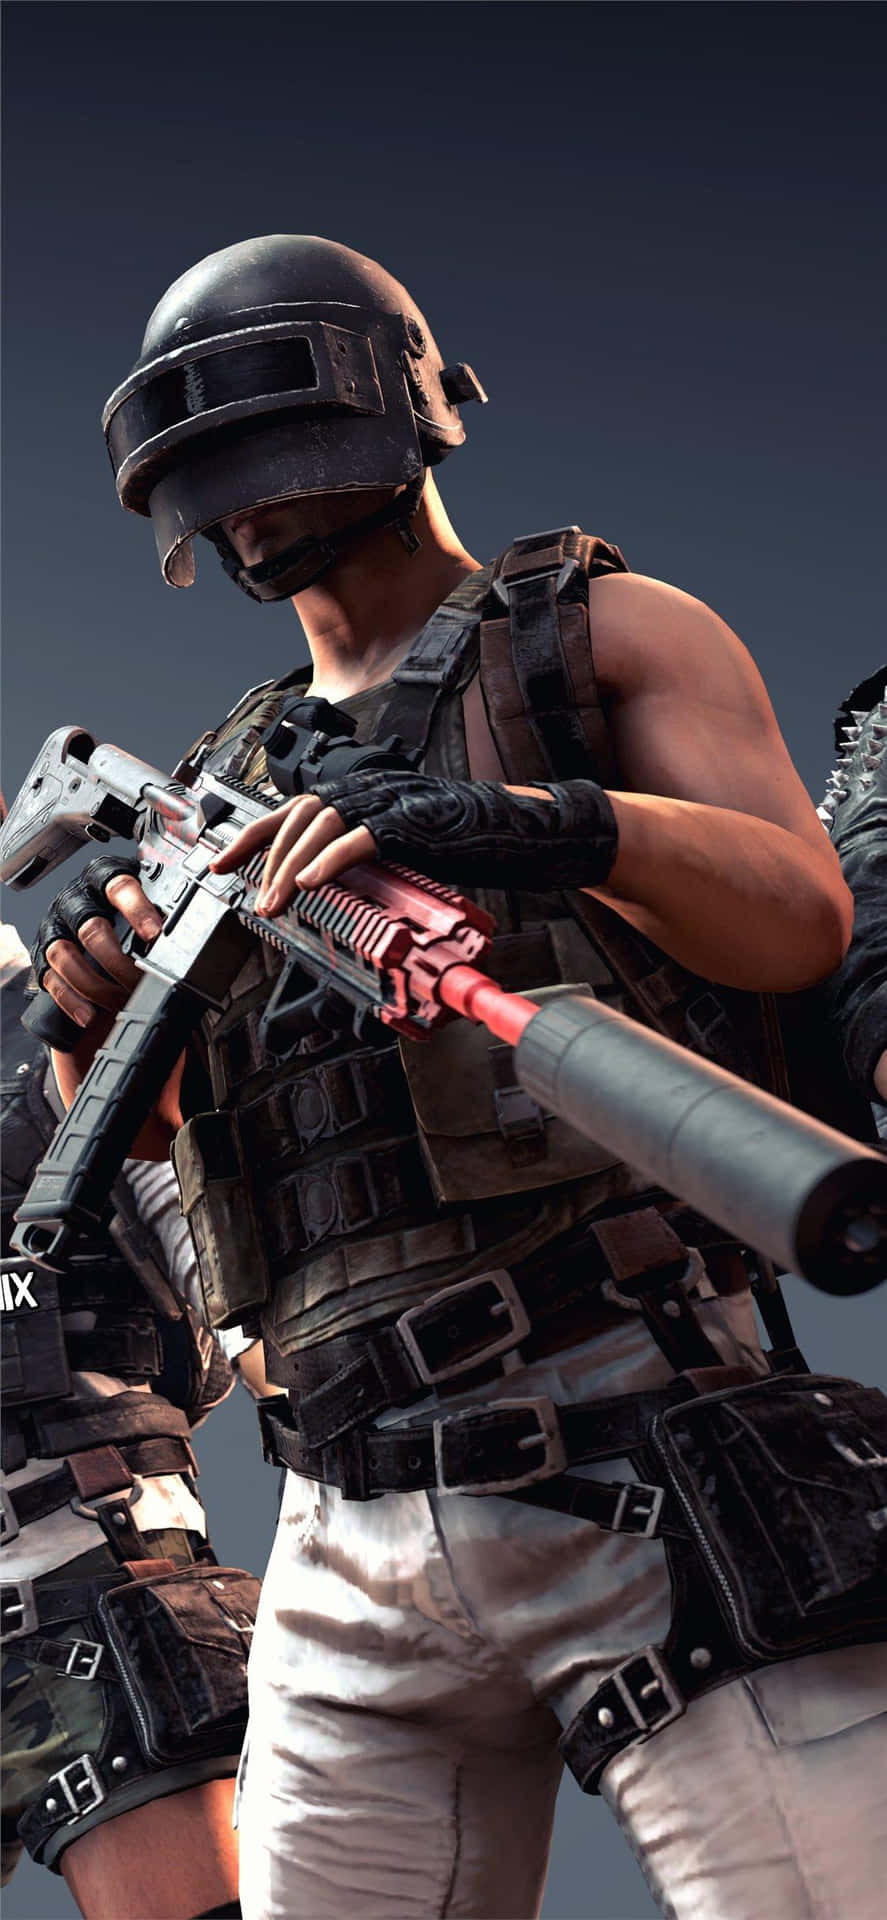 Player Holding Black And Red Rifle PUBG iPhone Wallpaper